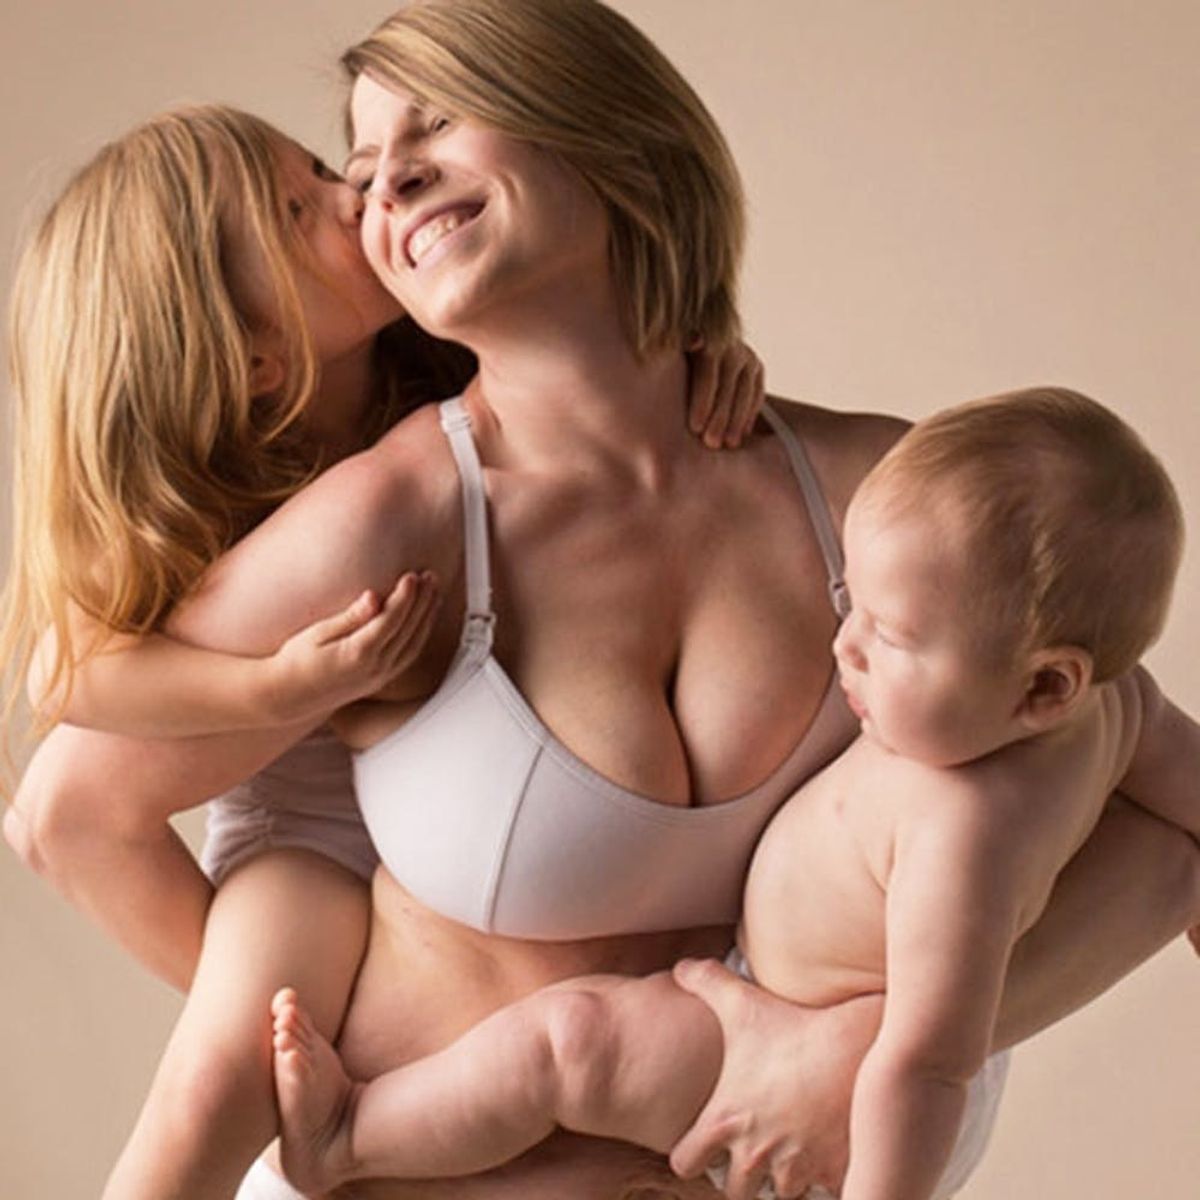 This Awesome Photo Series Is All About Flaunting Your Hot Mom Bod